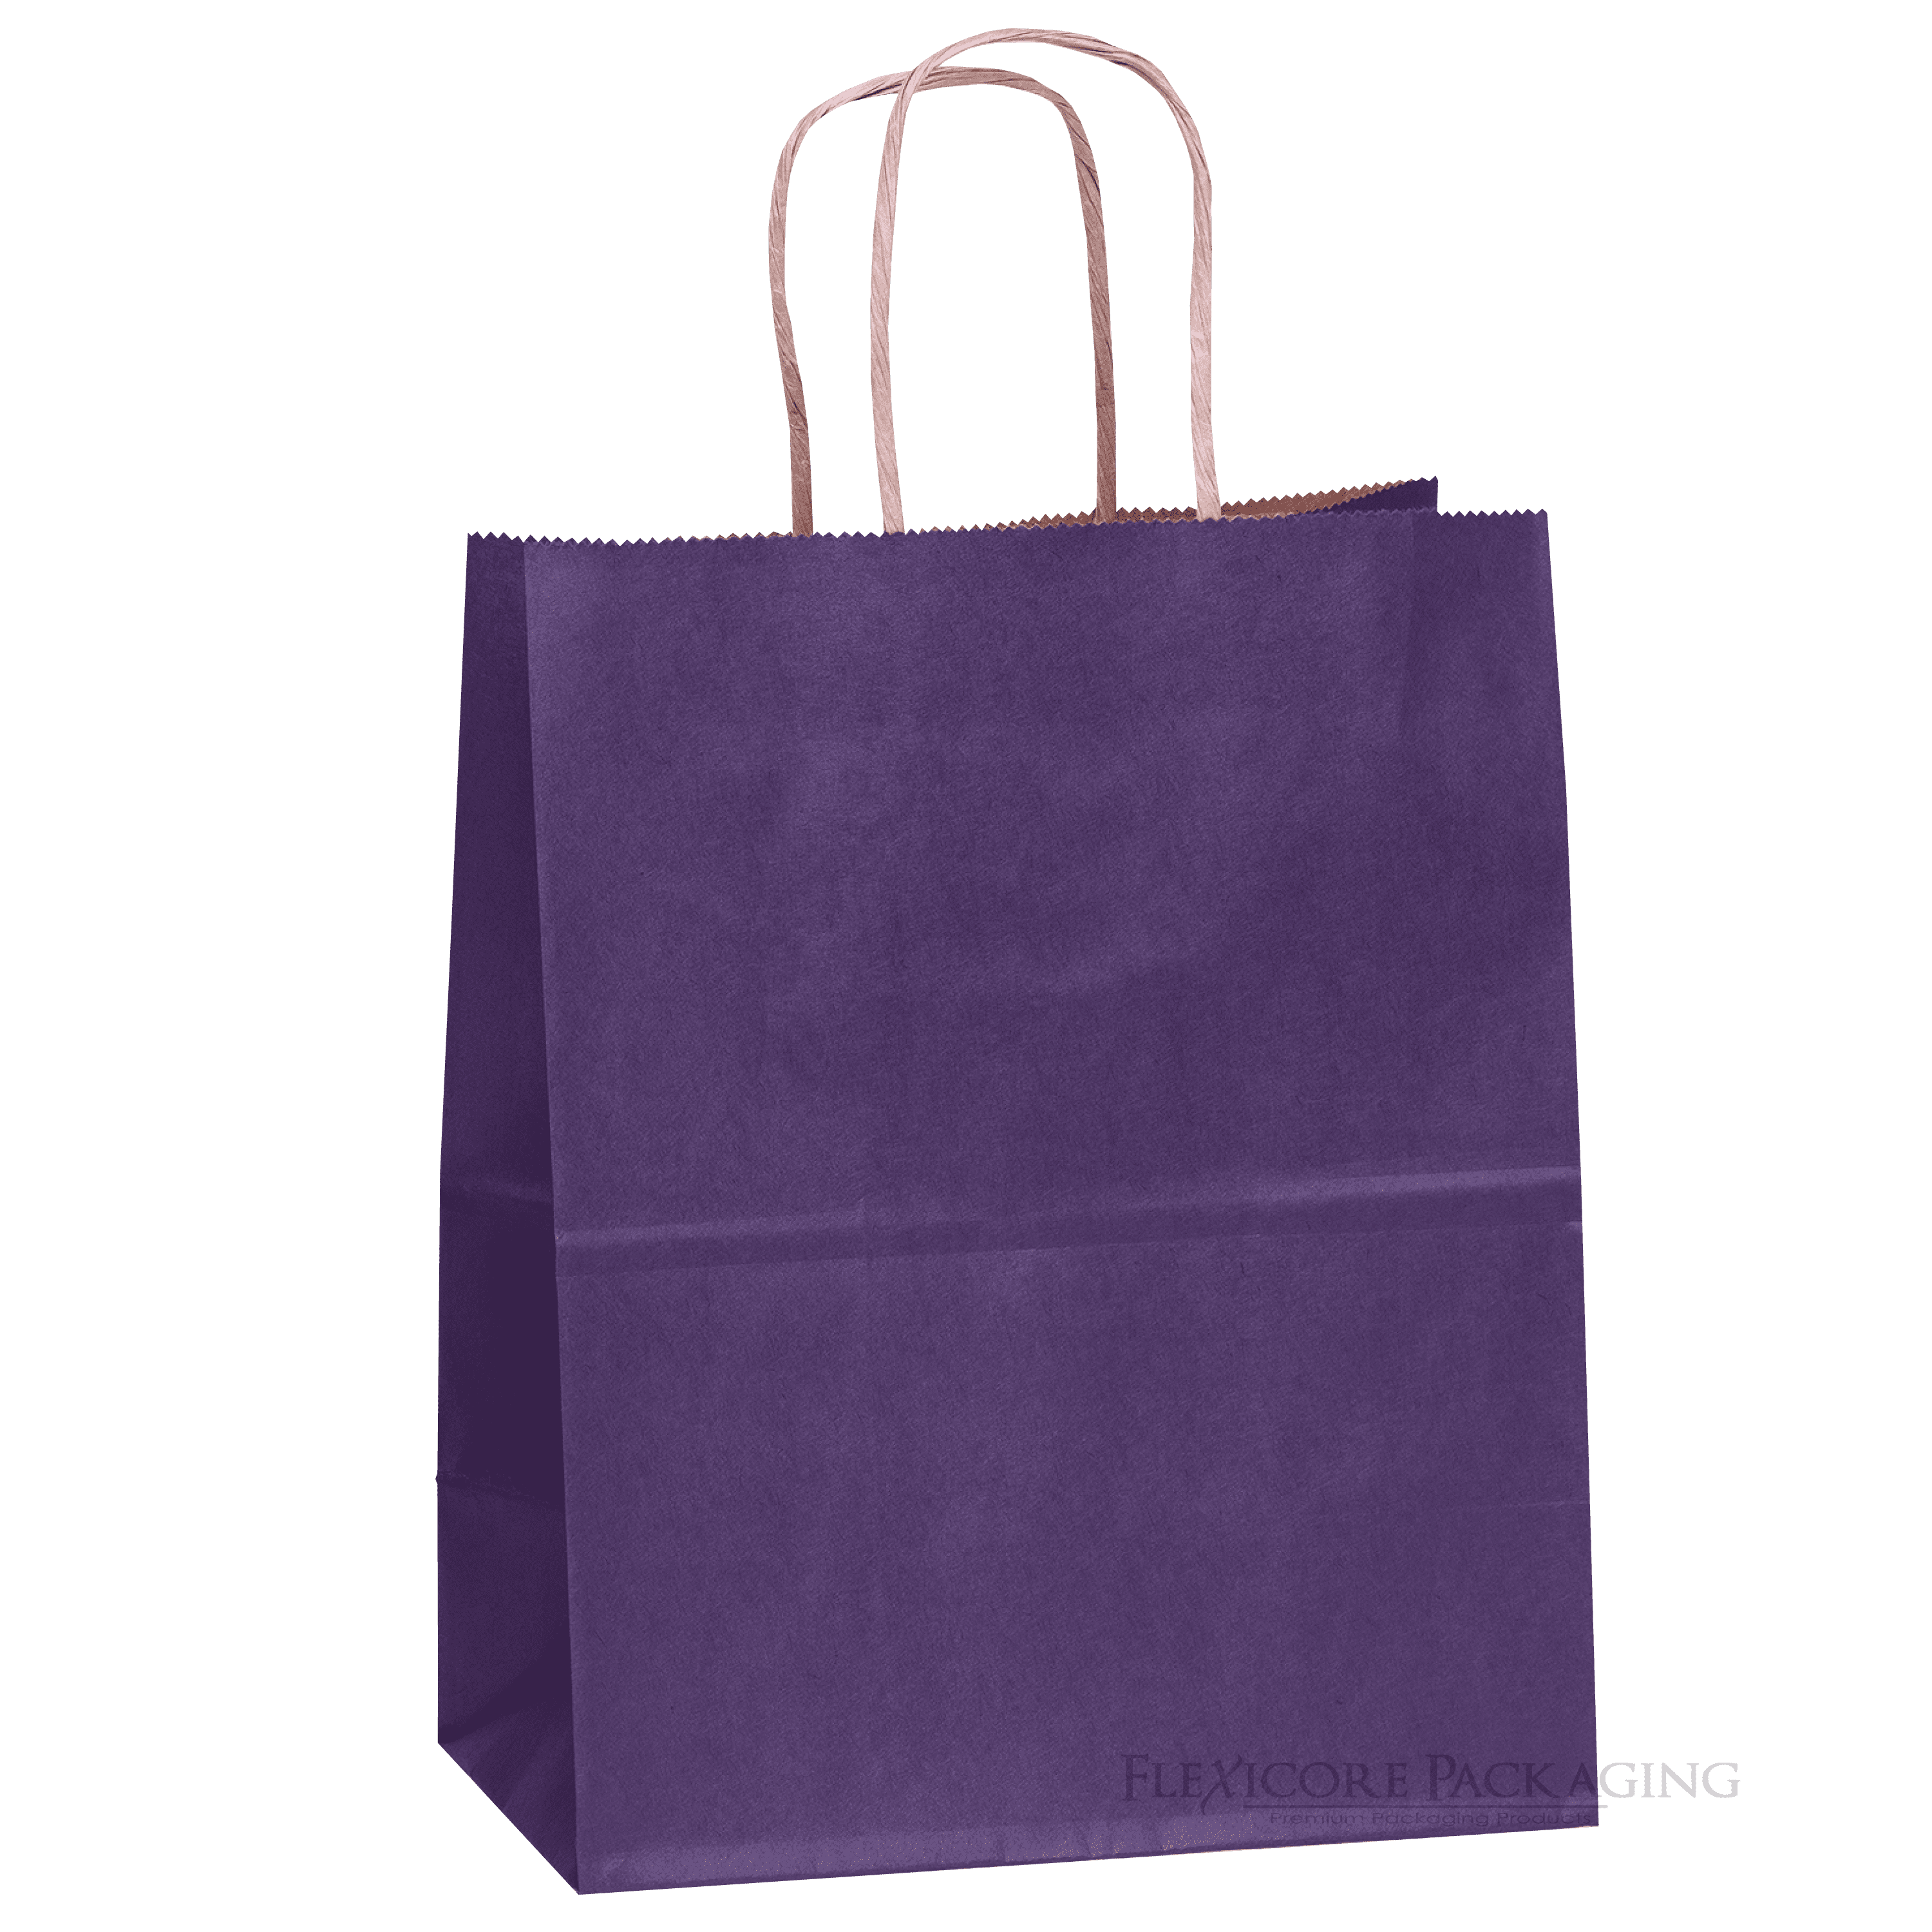 Hammont Paper Bags with Handles – Pink Gift Bags Bulk Medium Size 200 Pack  Paper Craft Bag – Kraft Bags with Window - Transparent Gift Bags - Party